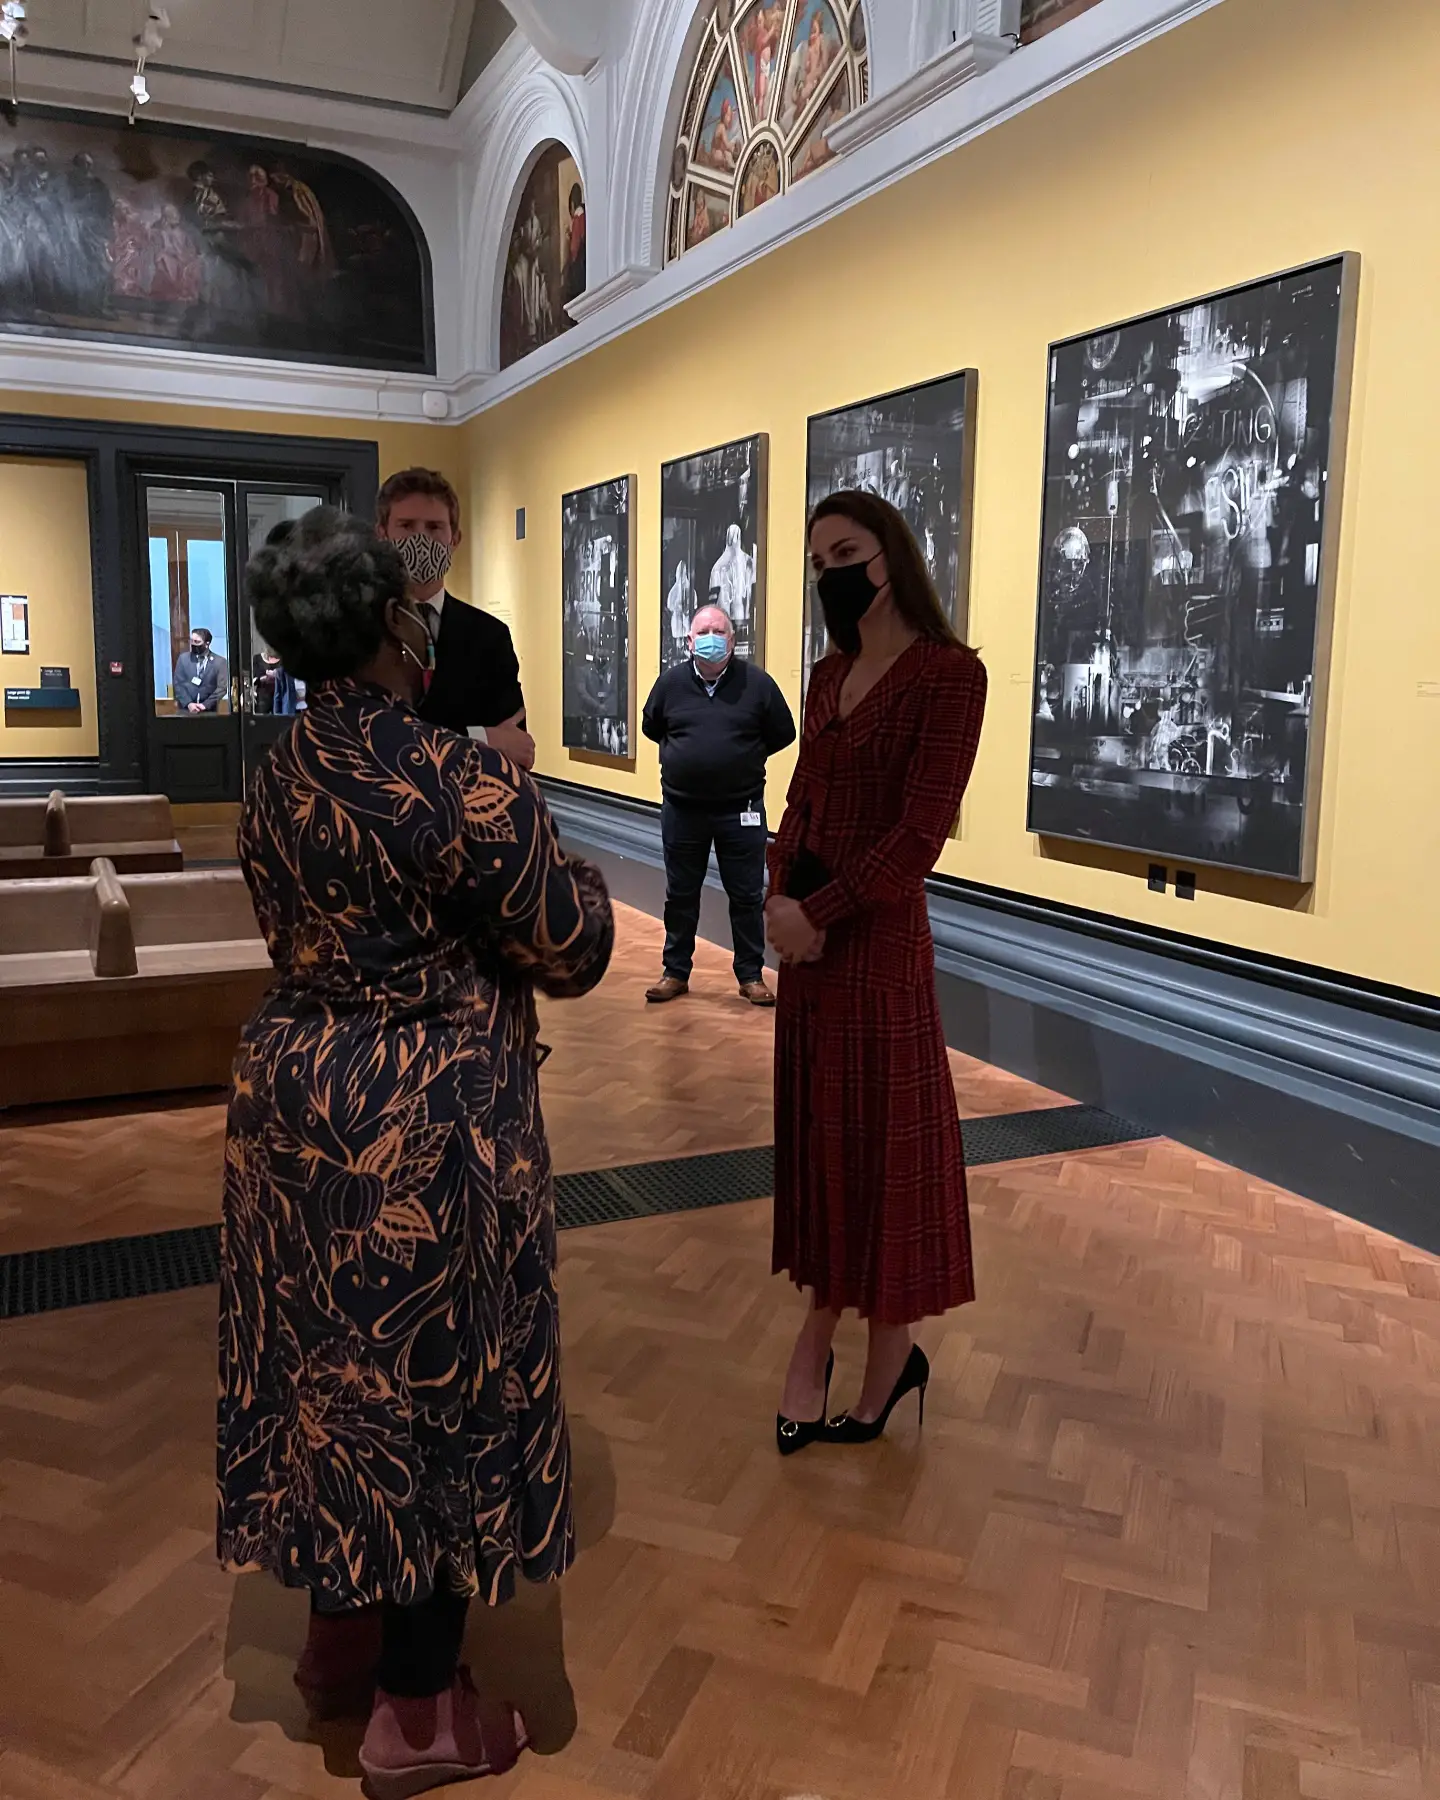 The Duchess of Cambridge visited Victoria and Albert Museum to mark its reopening